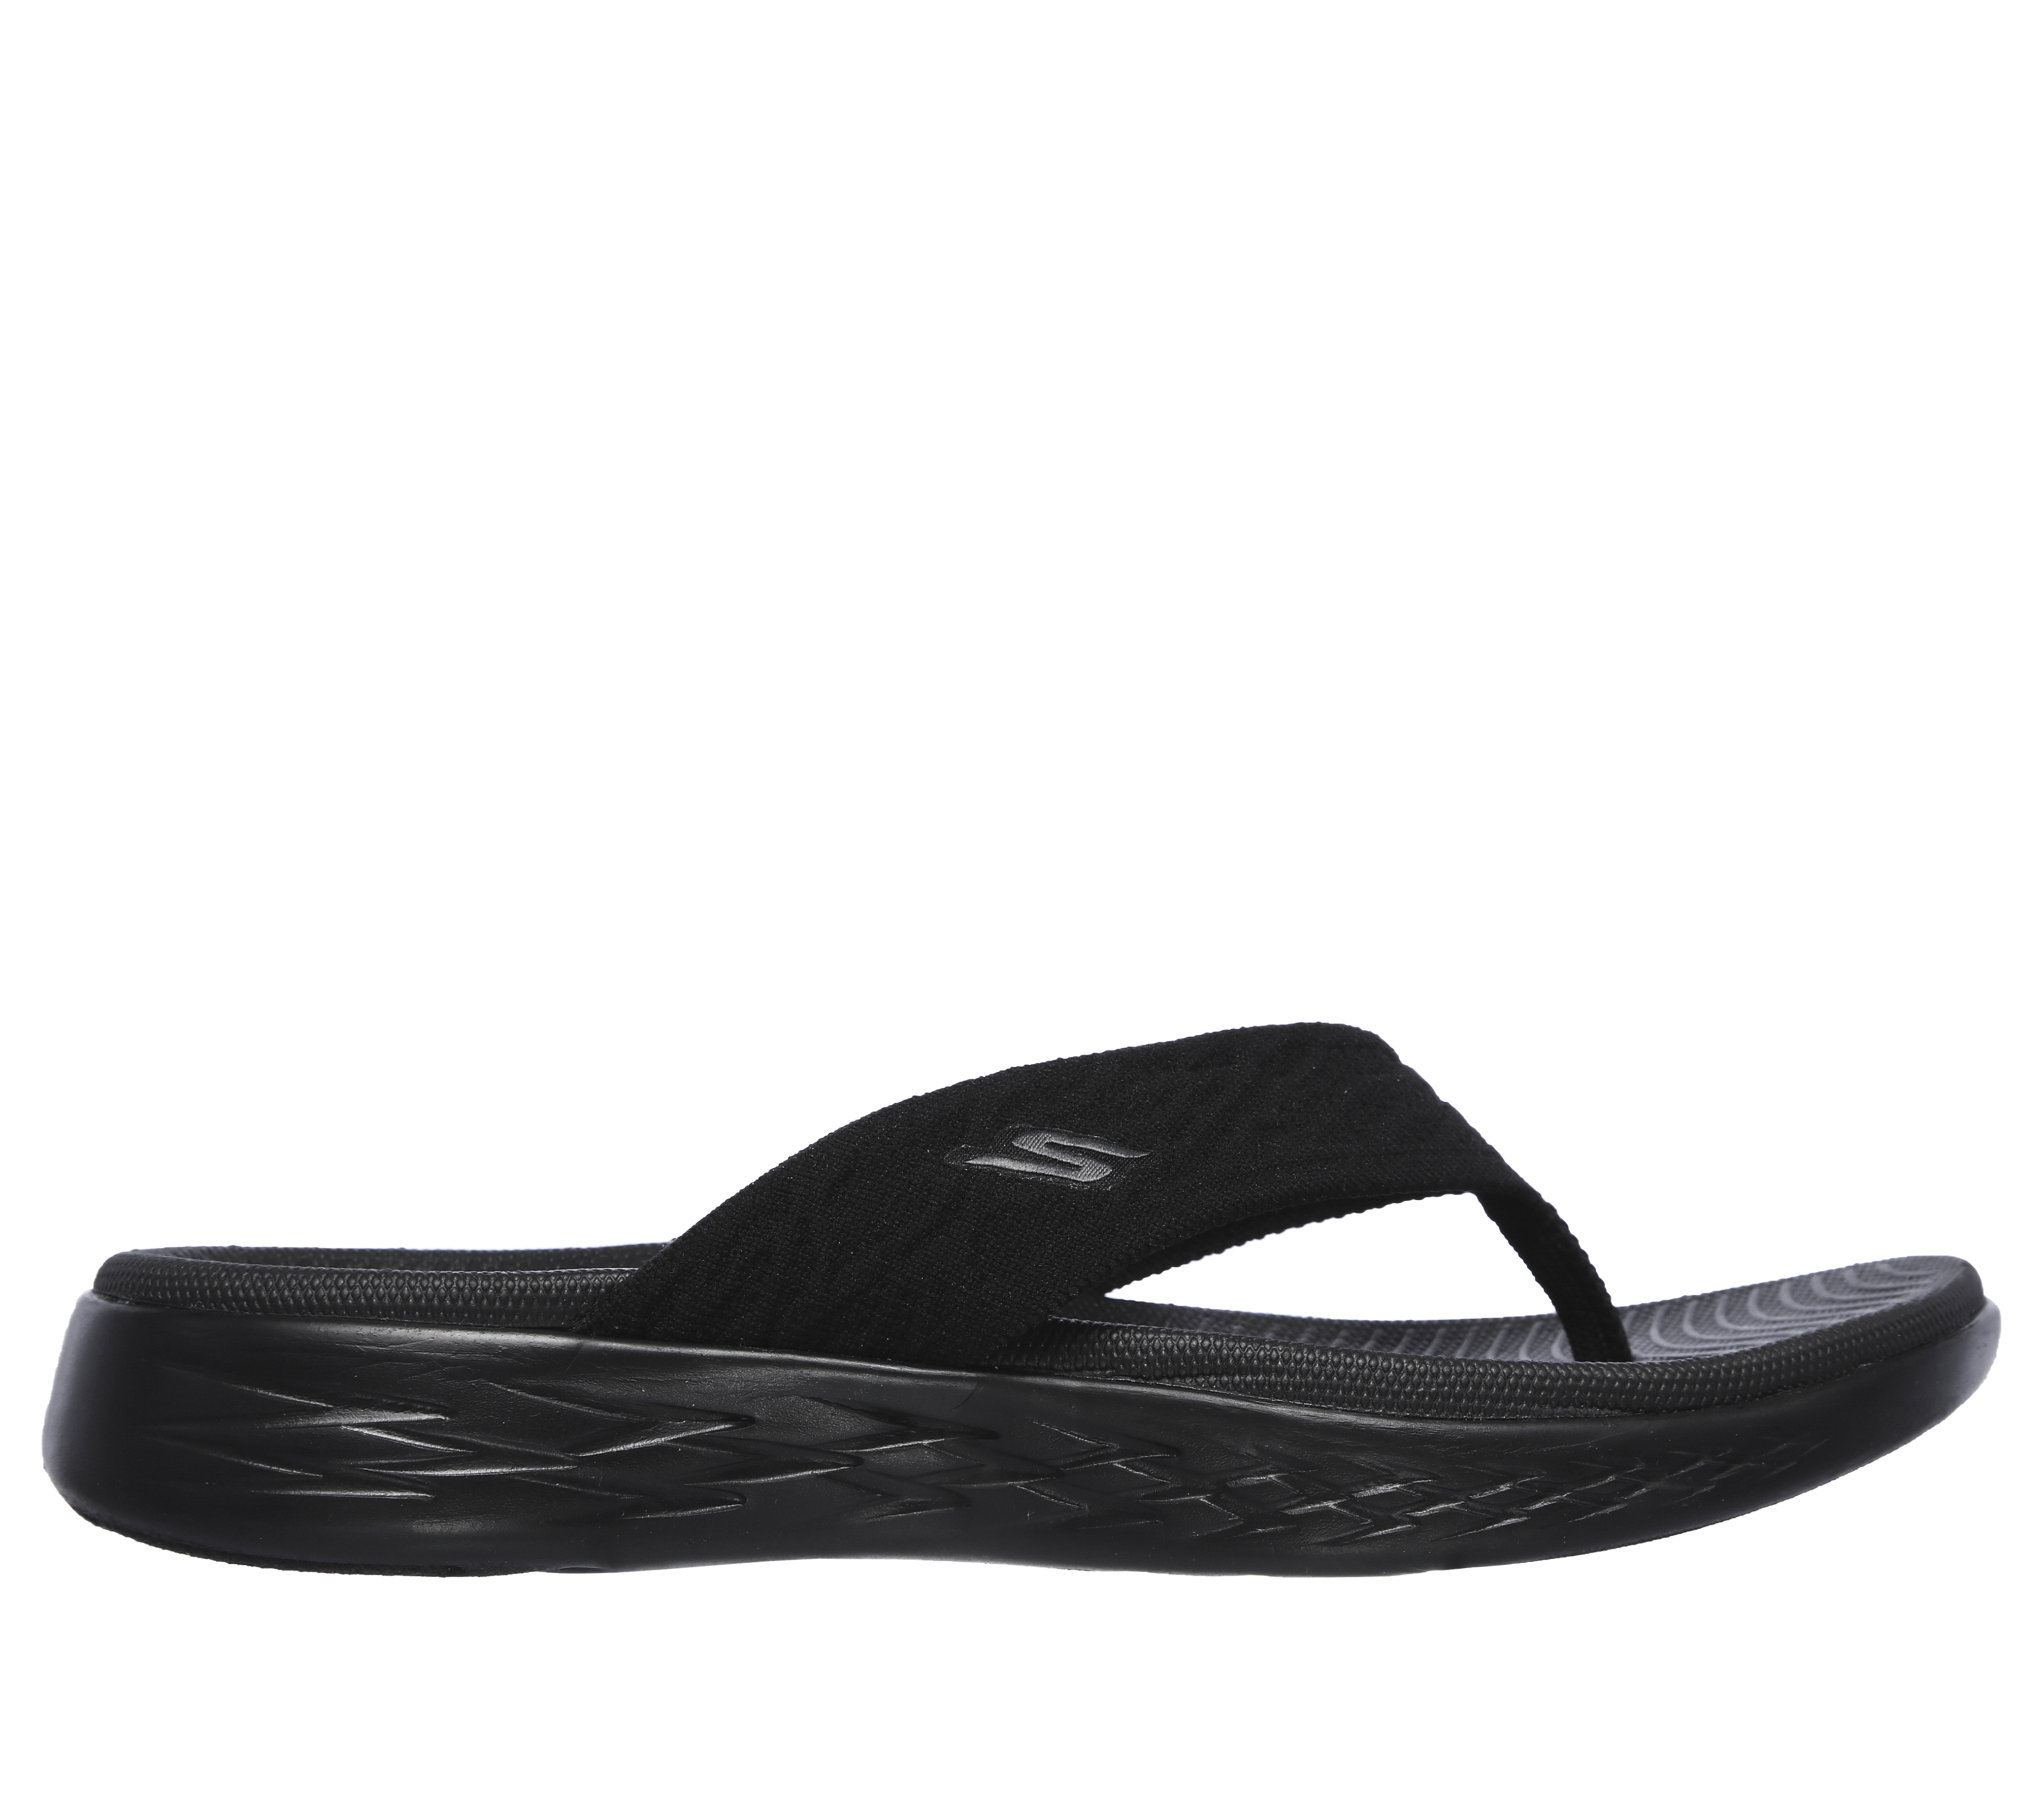 Skechers Women's On The Go 600 Sunny Athletic Flip Flop Thong